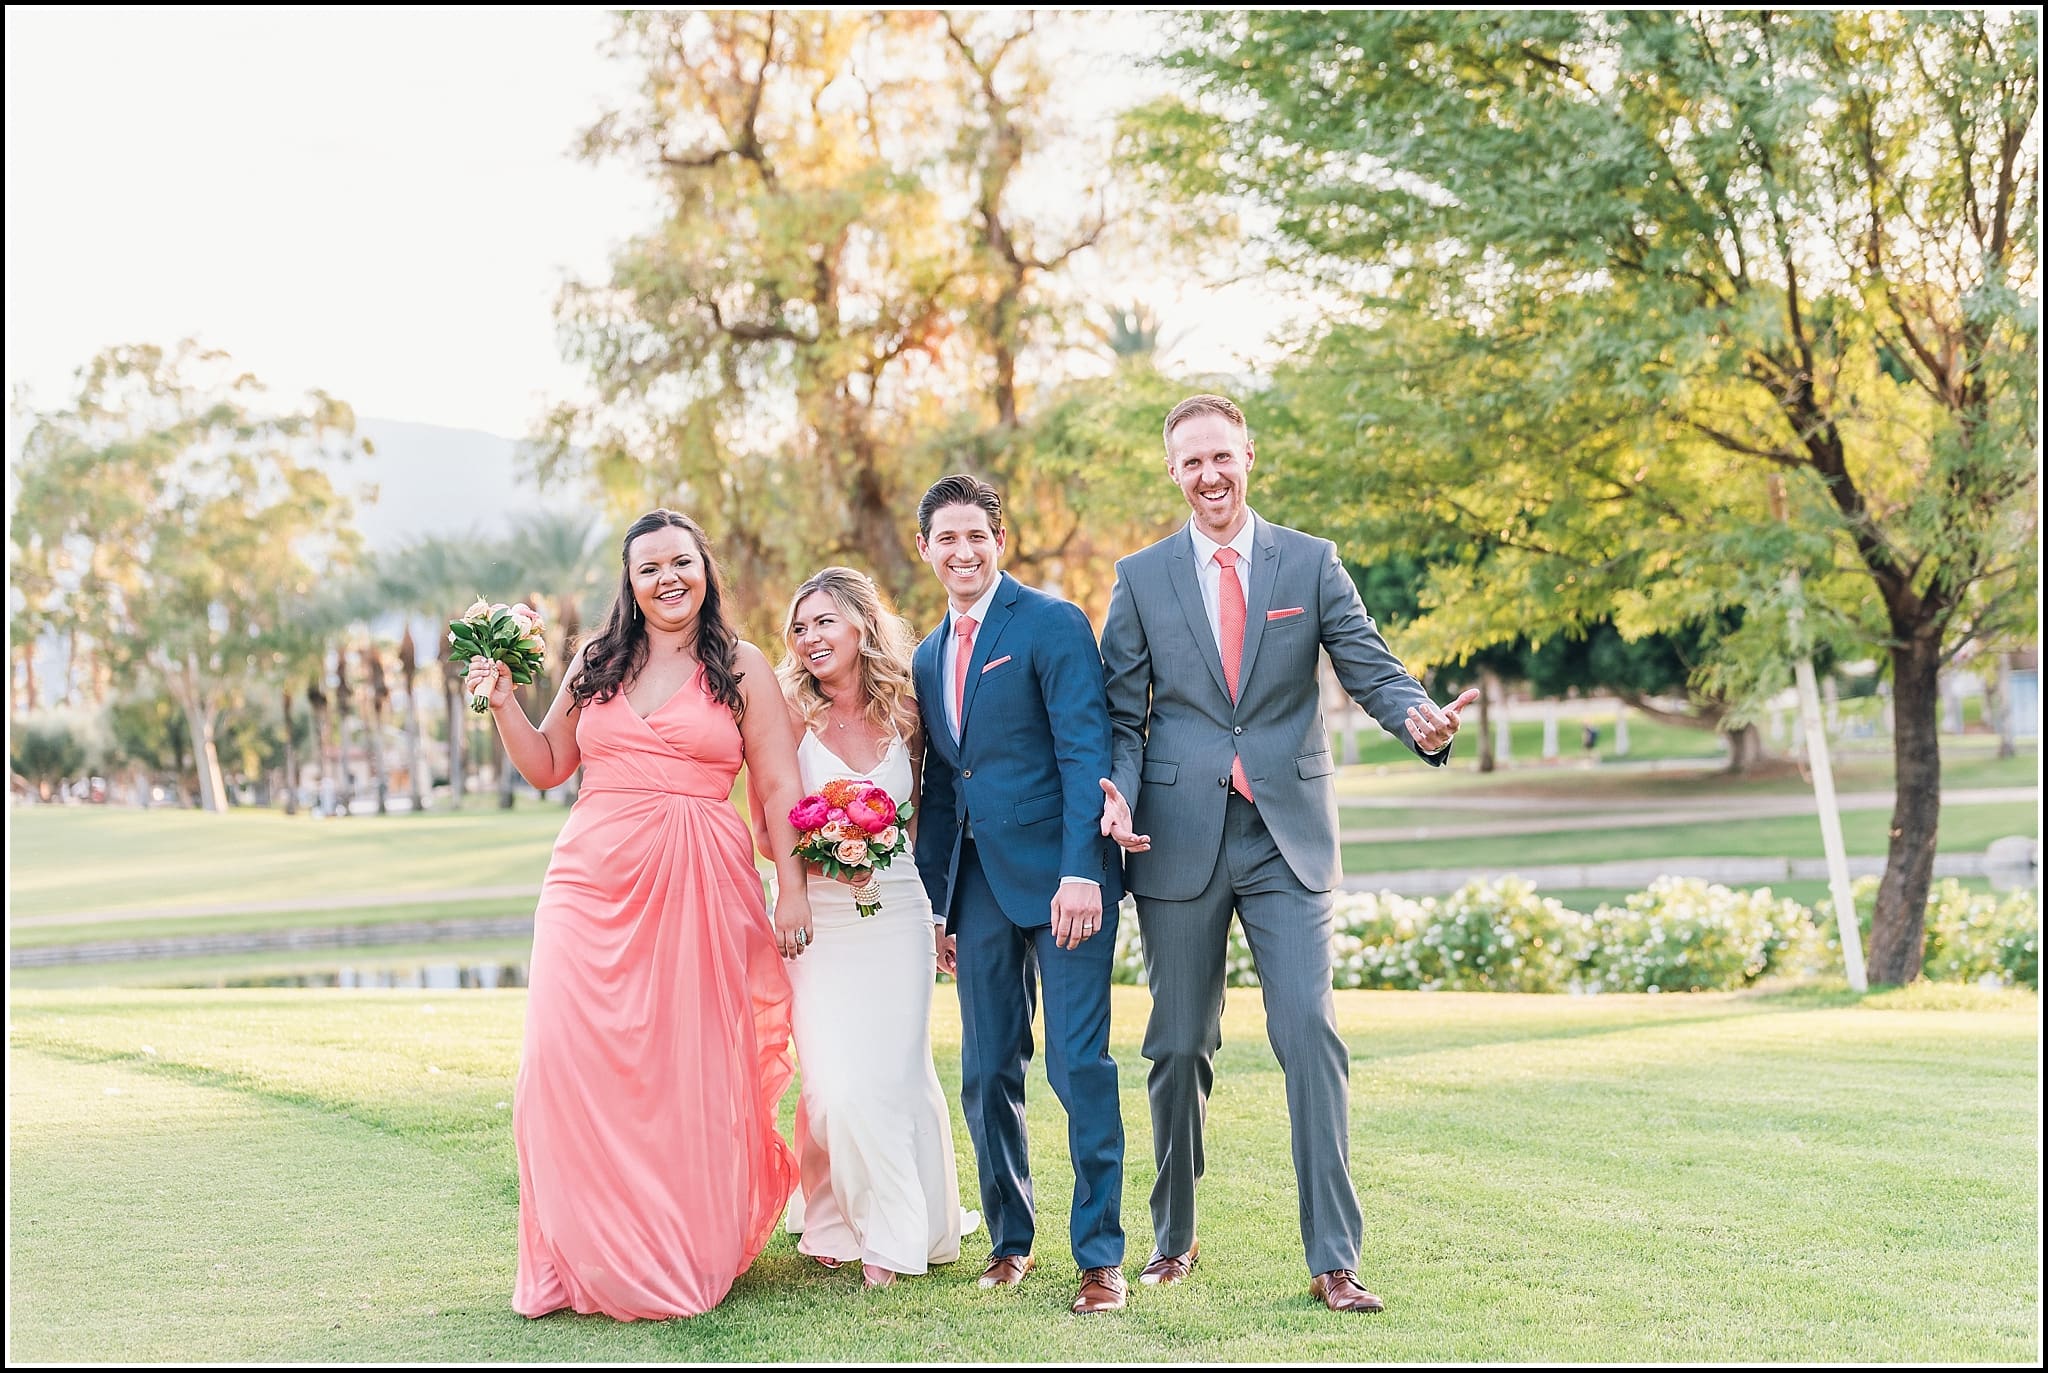  favorite wedding images 2016, wedding photos from 2016, our favorite wedding photos, palm desert wedding photos, desert falls country club